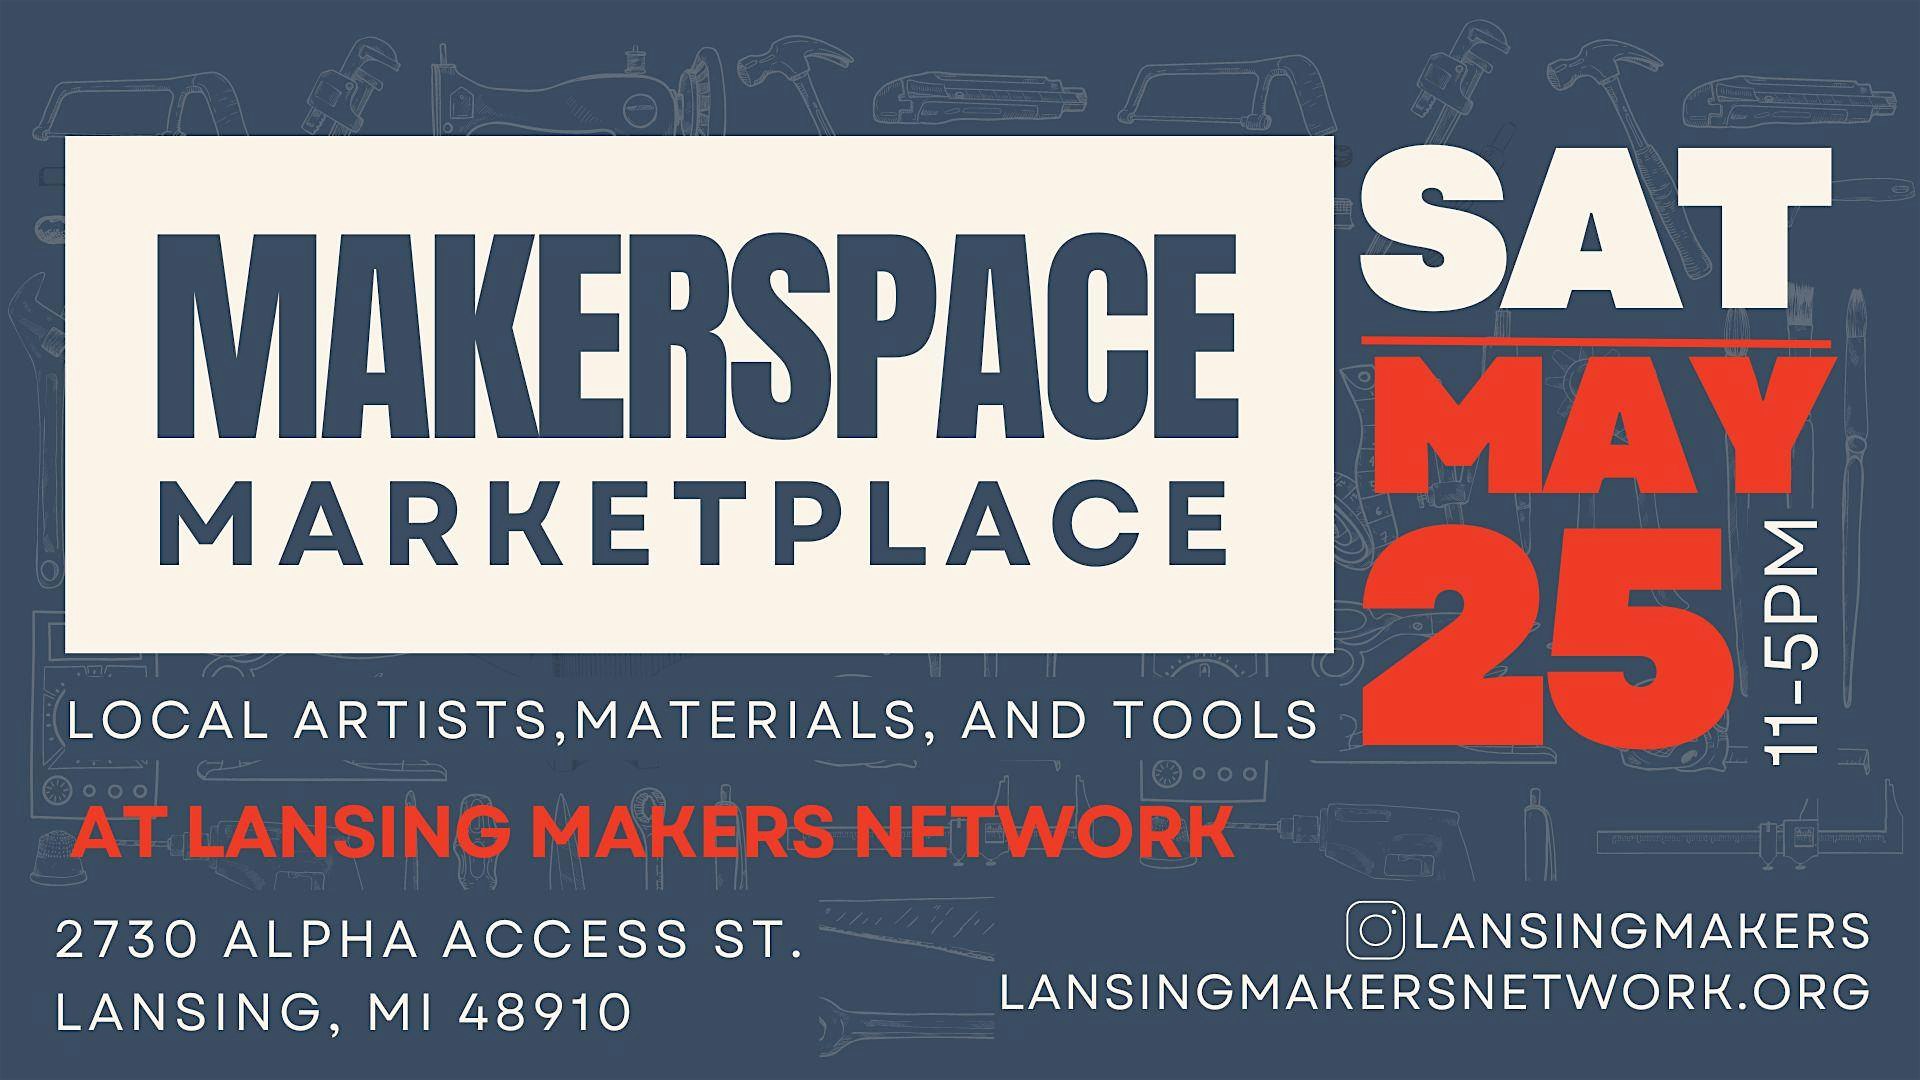 Makerspace Marketplace